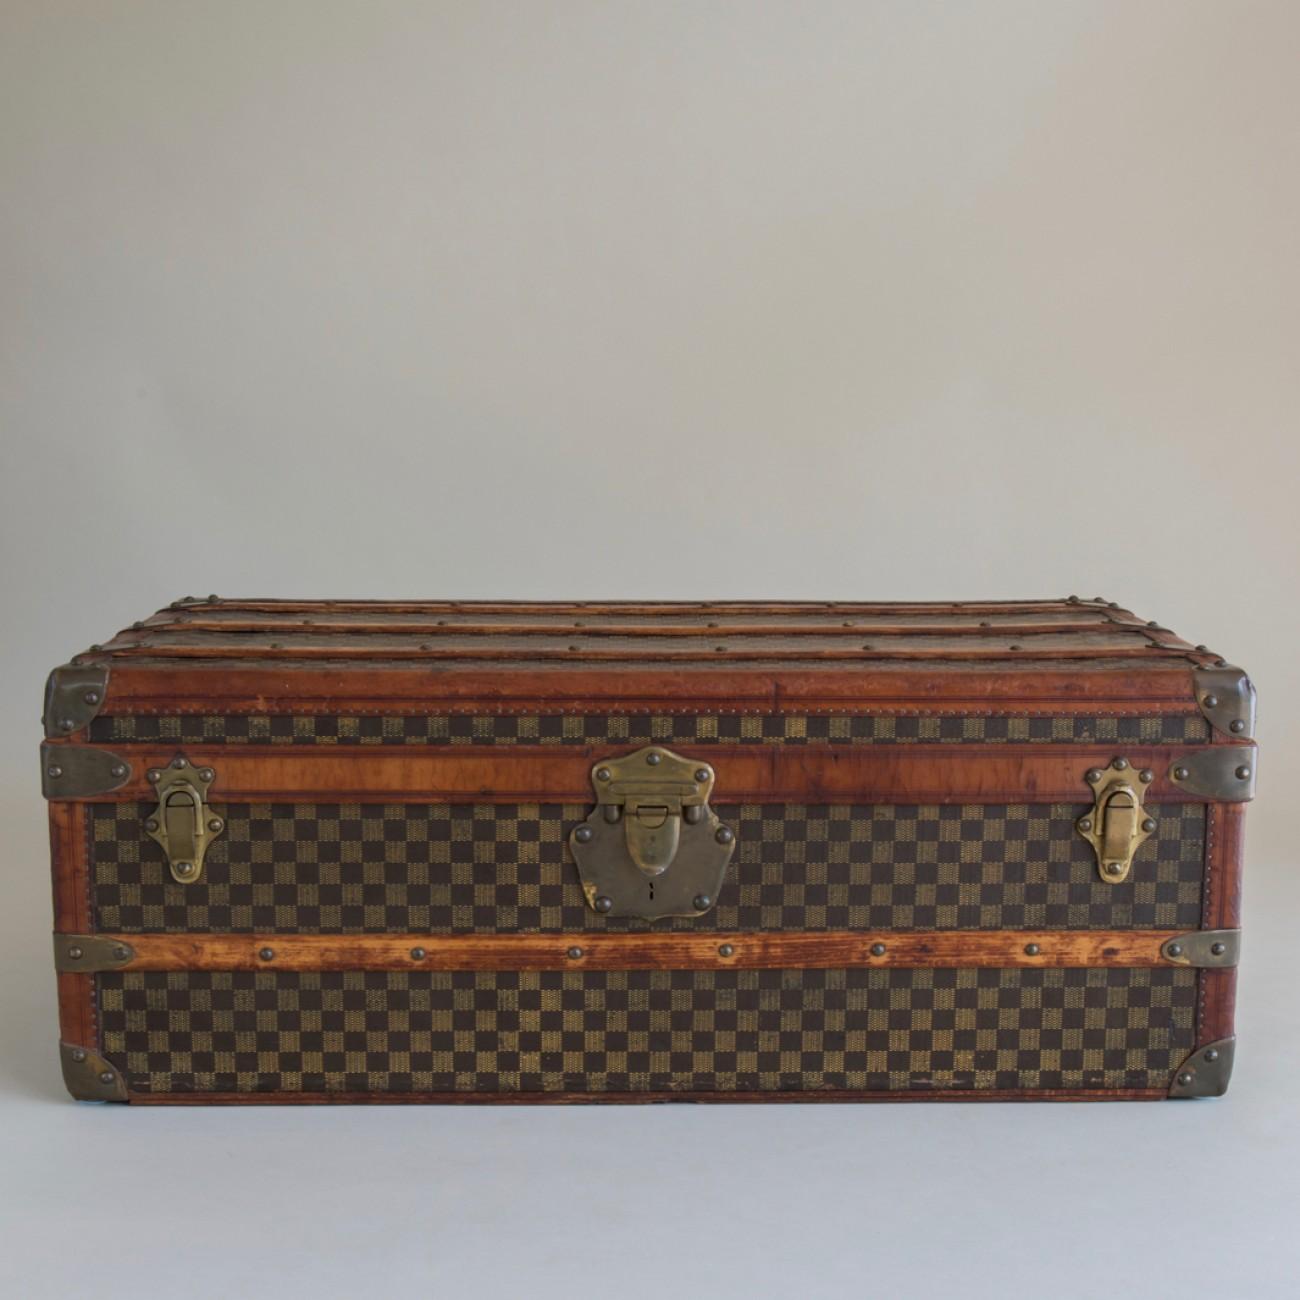 A charming cabin trunk in a checkerboard pattern canvas by French maker, Paul Romand, 213 Rue St Honore´, Paris. With leather trim, exceptional brass fittings and original interior lining, circa 1900.

Dimensions: 92 cm /36 inches (length) x 53.5